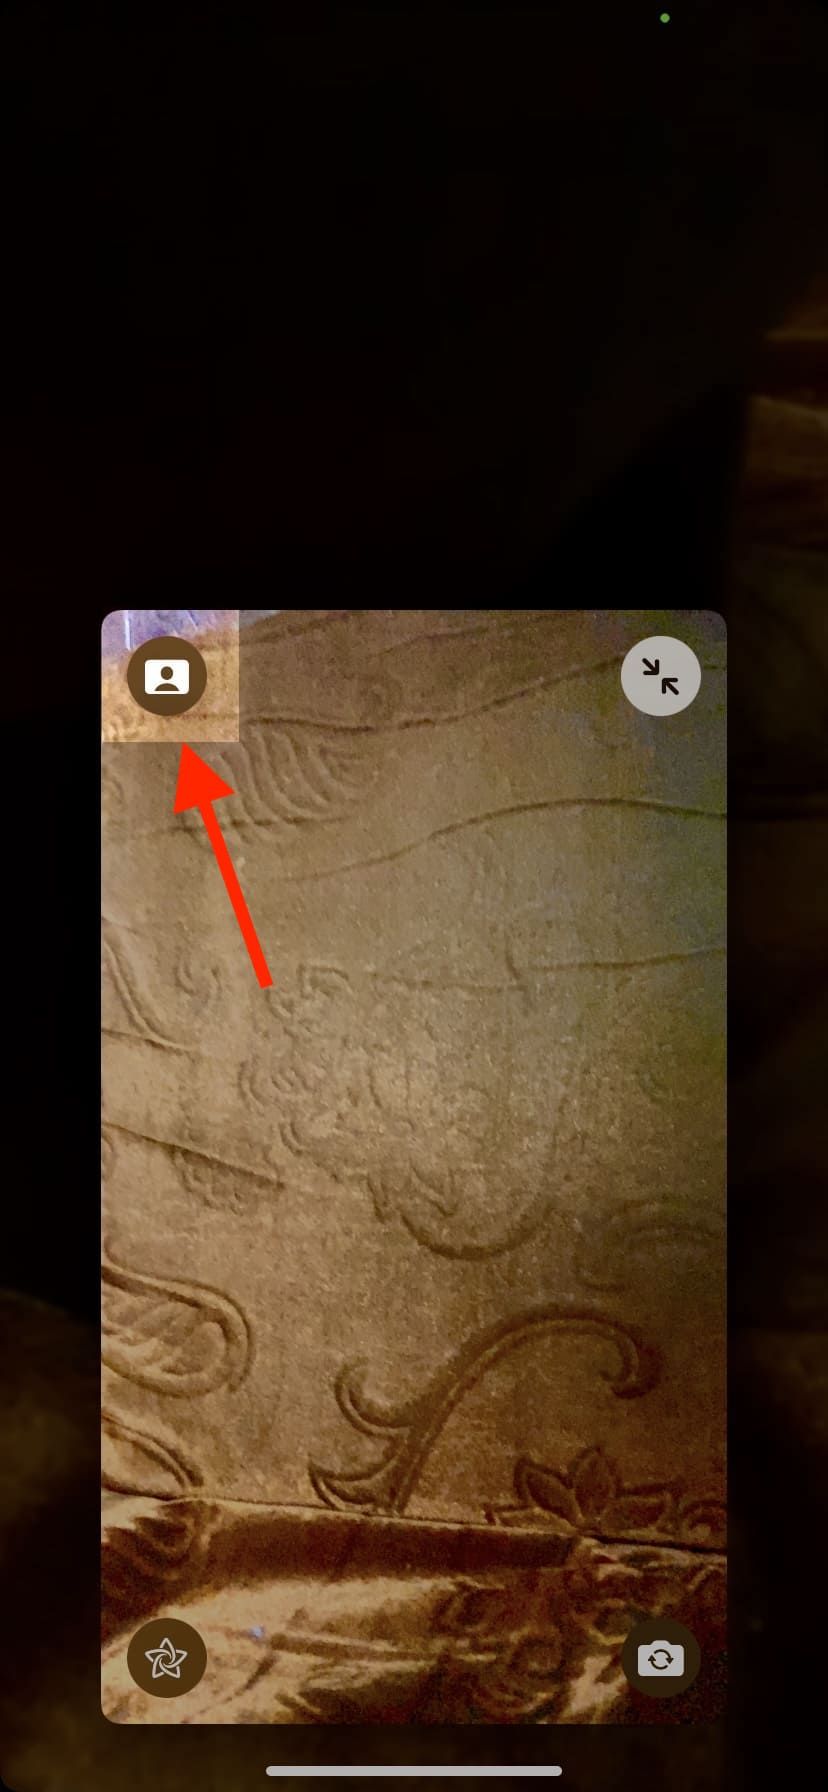 Tap Portrait Mode button from your video thumbnail in FaceTime